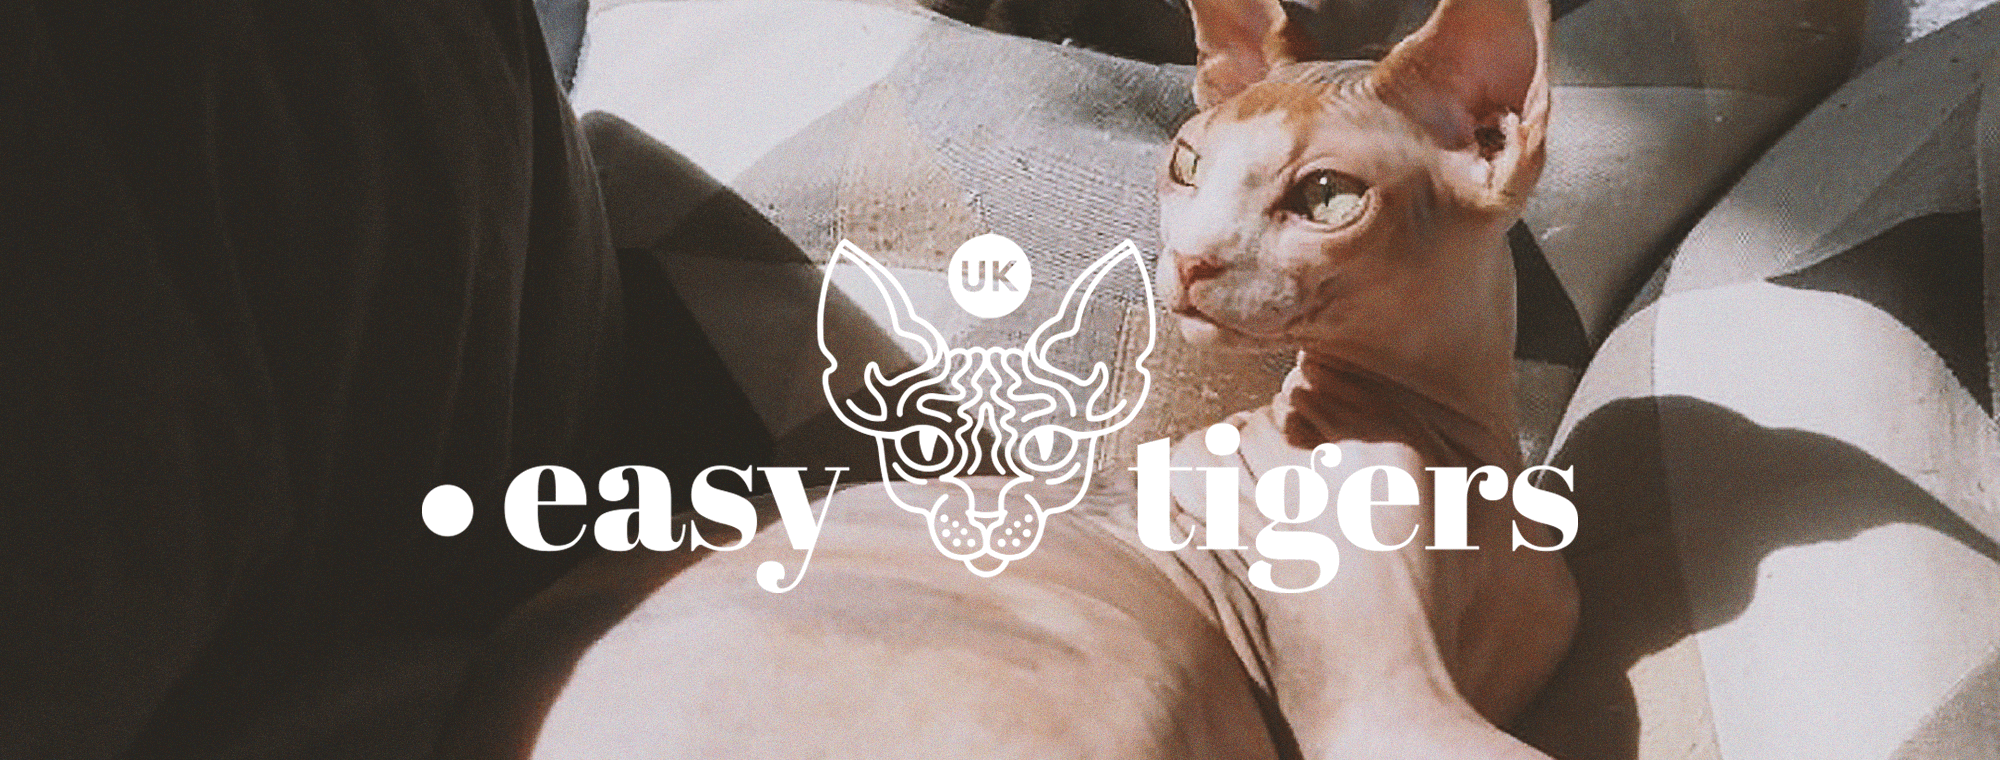 Easy Tigers